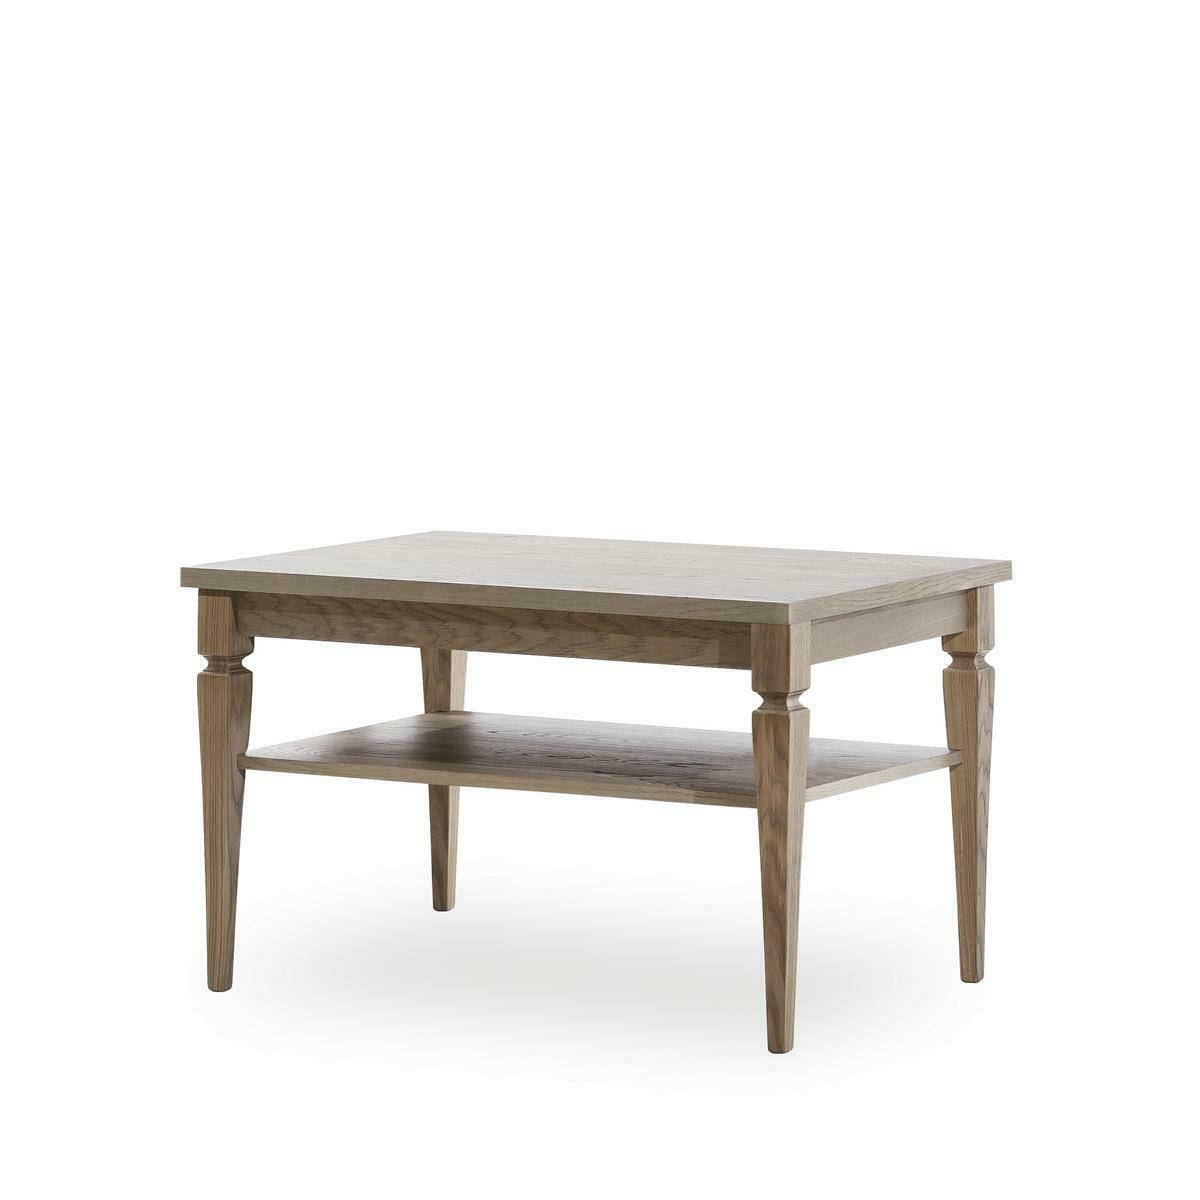 Classic country style made of real wooden rectangular 2-level side coffee table model CE-S2